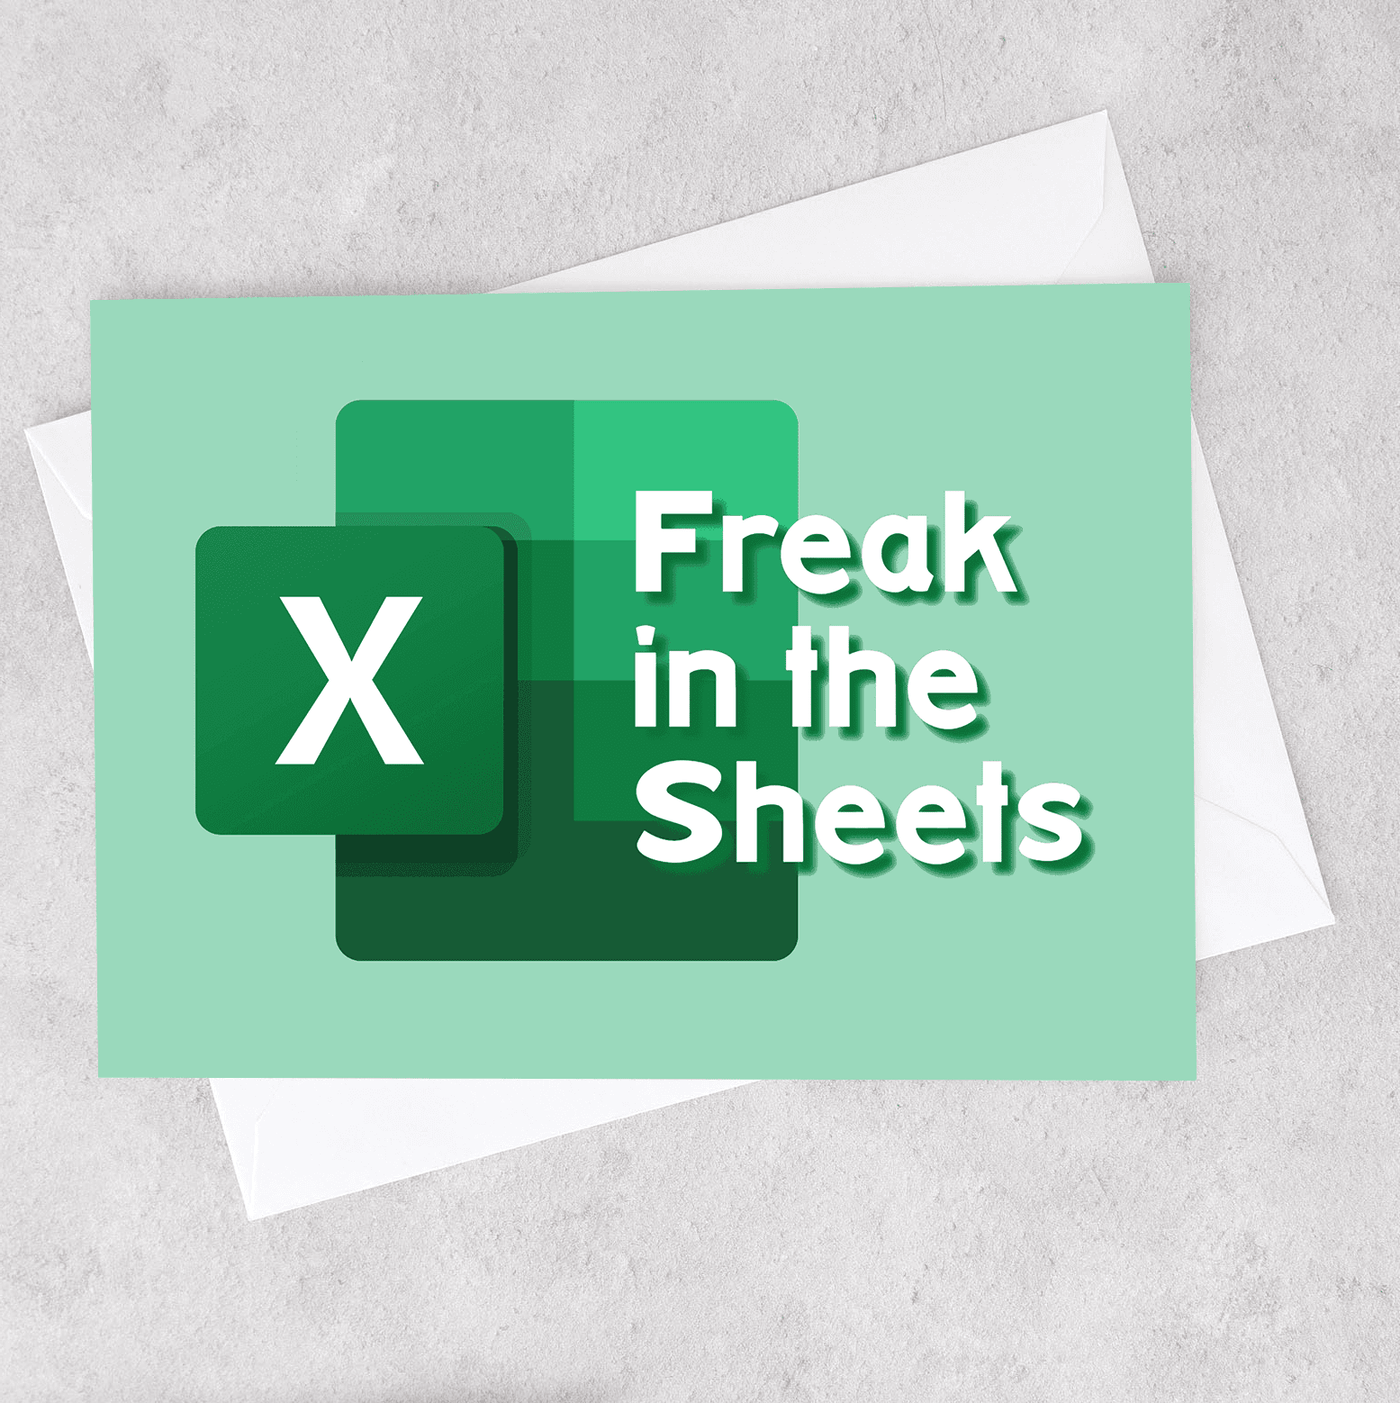 This greeting card is green and says "freak in the sheets" with a symbol like excel.